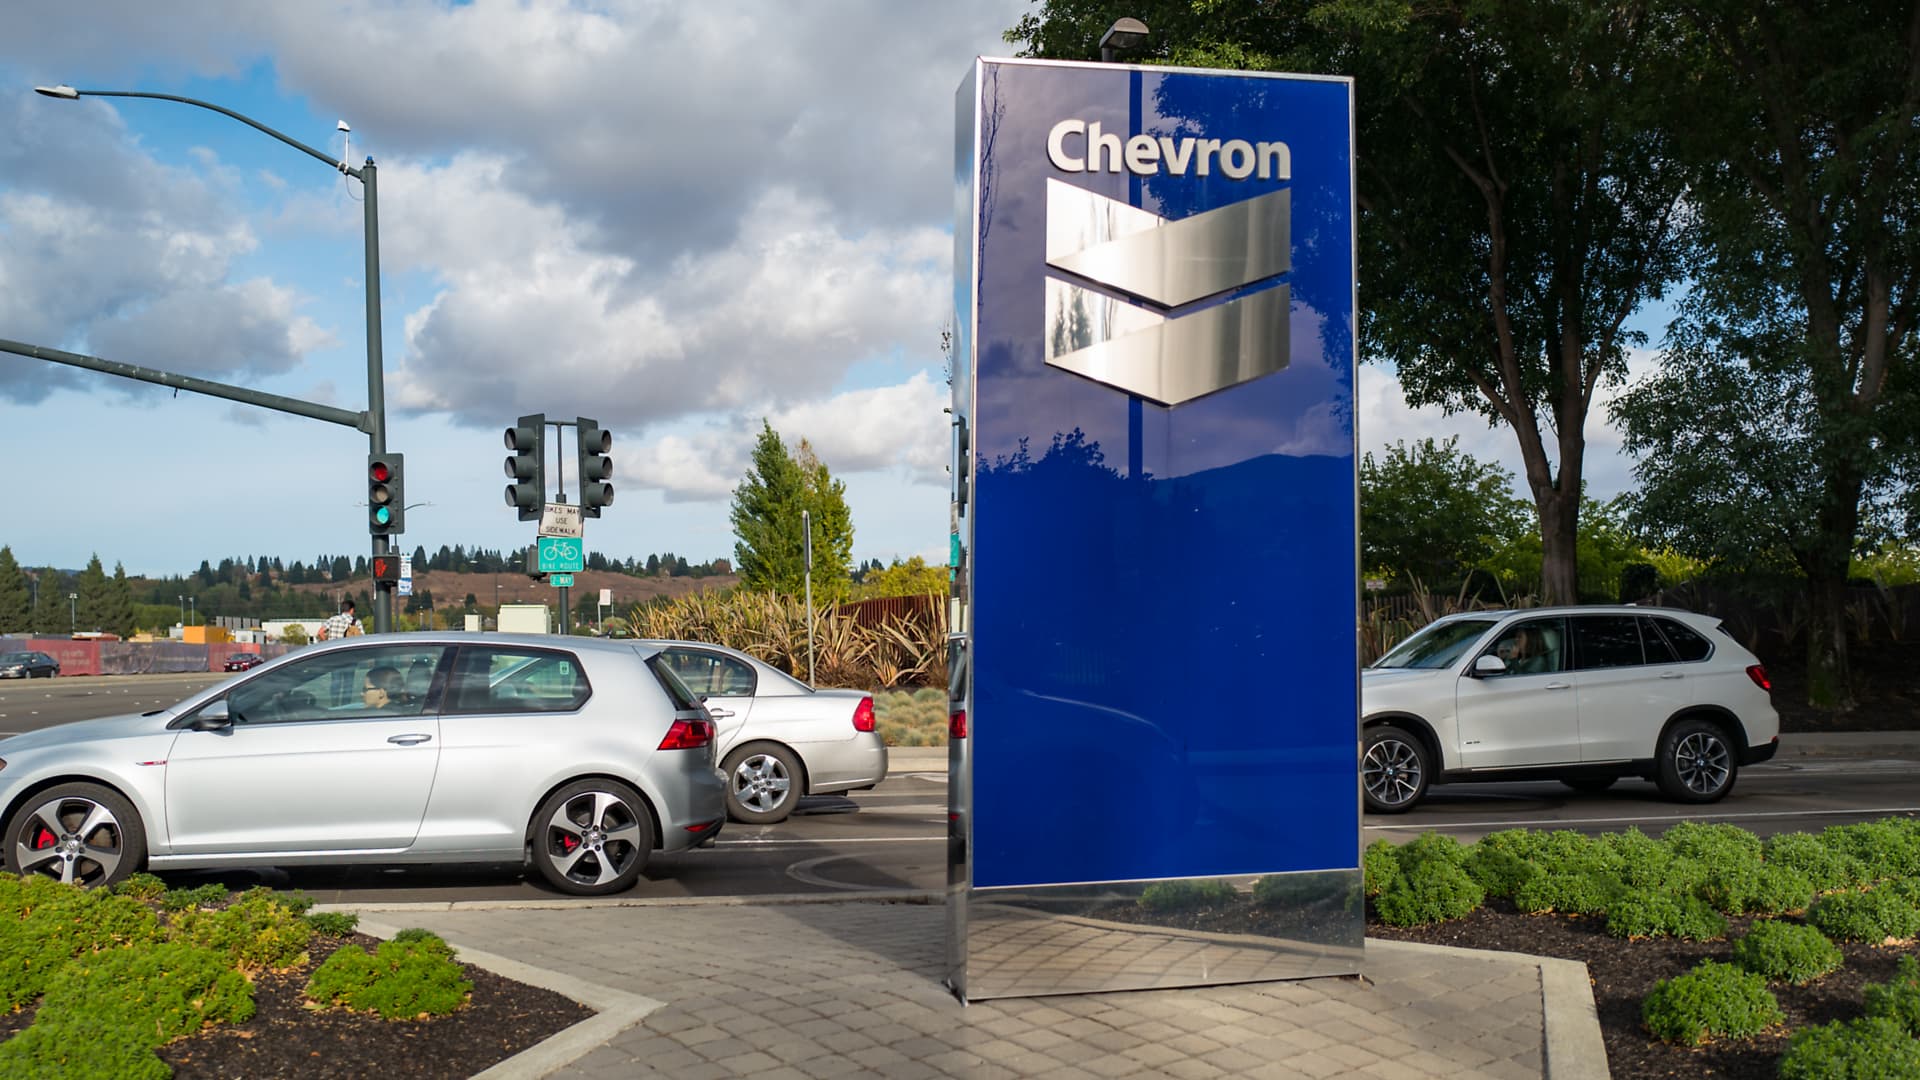 Chevron appoints Eimear Bonner as new finance chief and issues preliminary second-quarter earnings results